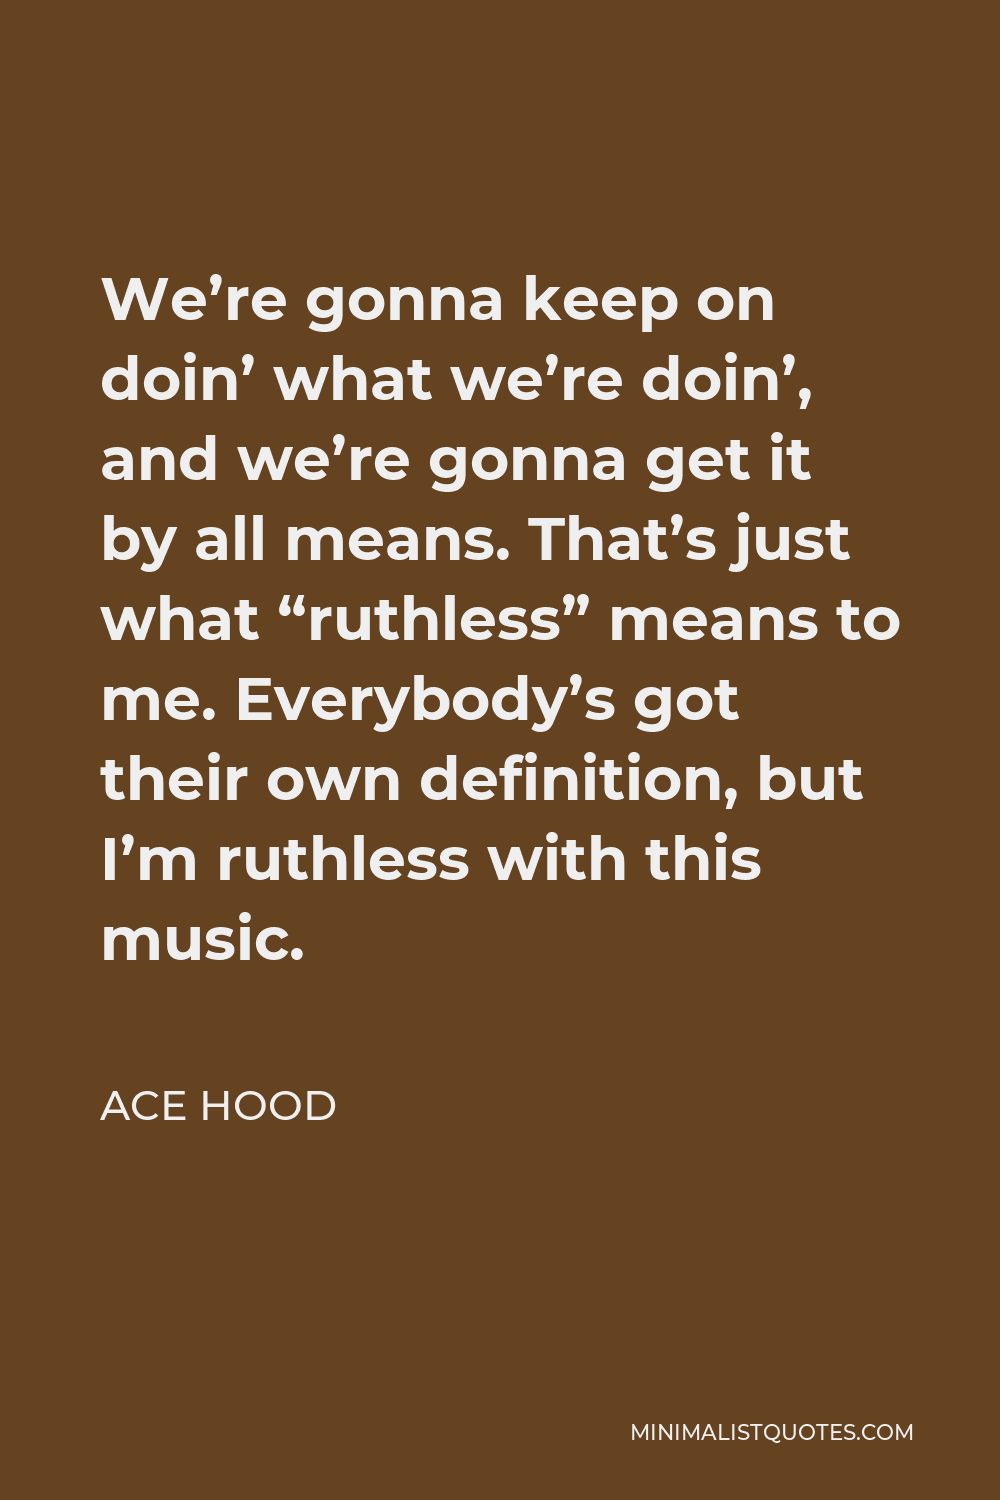 Ace Hood Quote - We’re gonna keep on doin’ what we’re doin’, and we’re gonna get it by all means. That’s just what “ruthless” means to me. Everybody’s got their own definition, but I’m ruthless with this music.